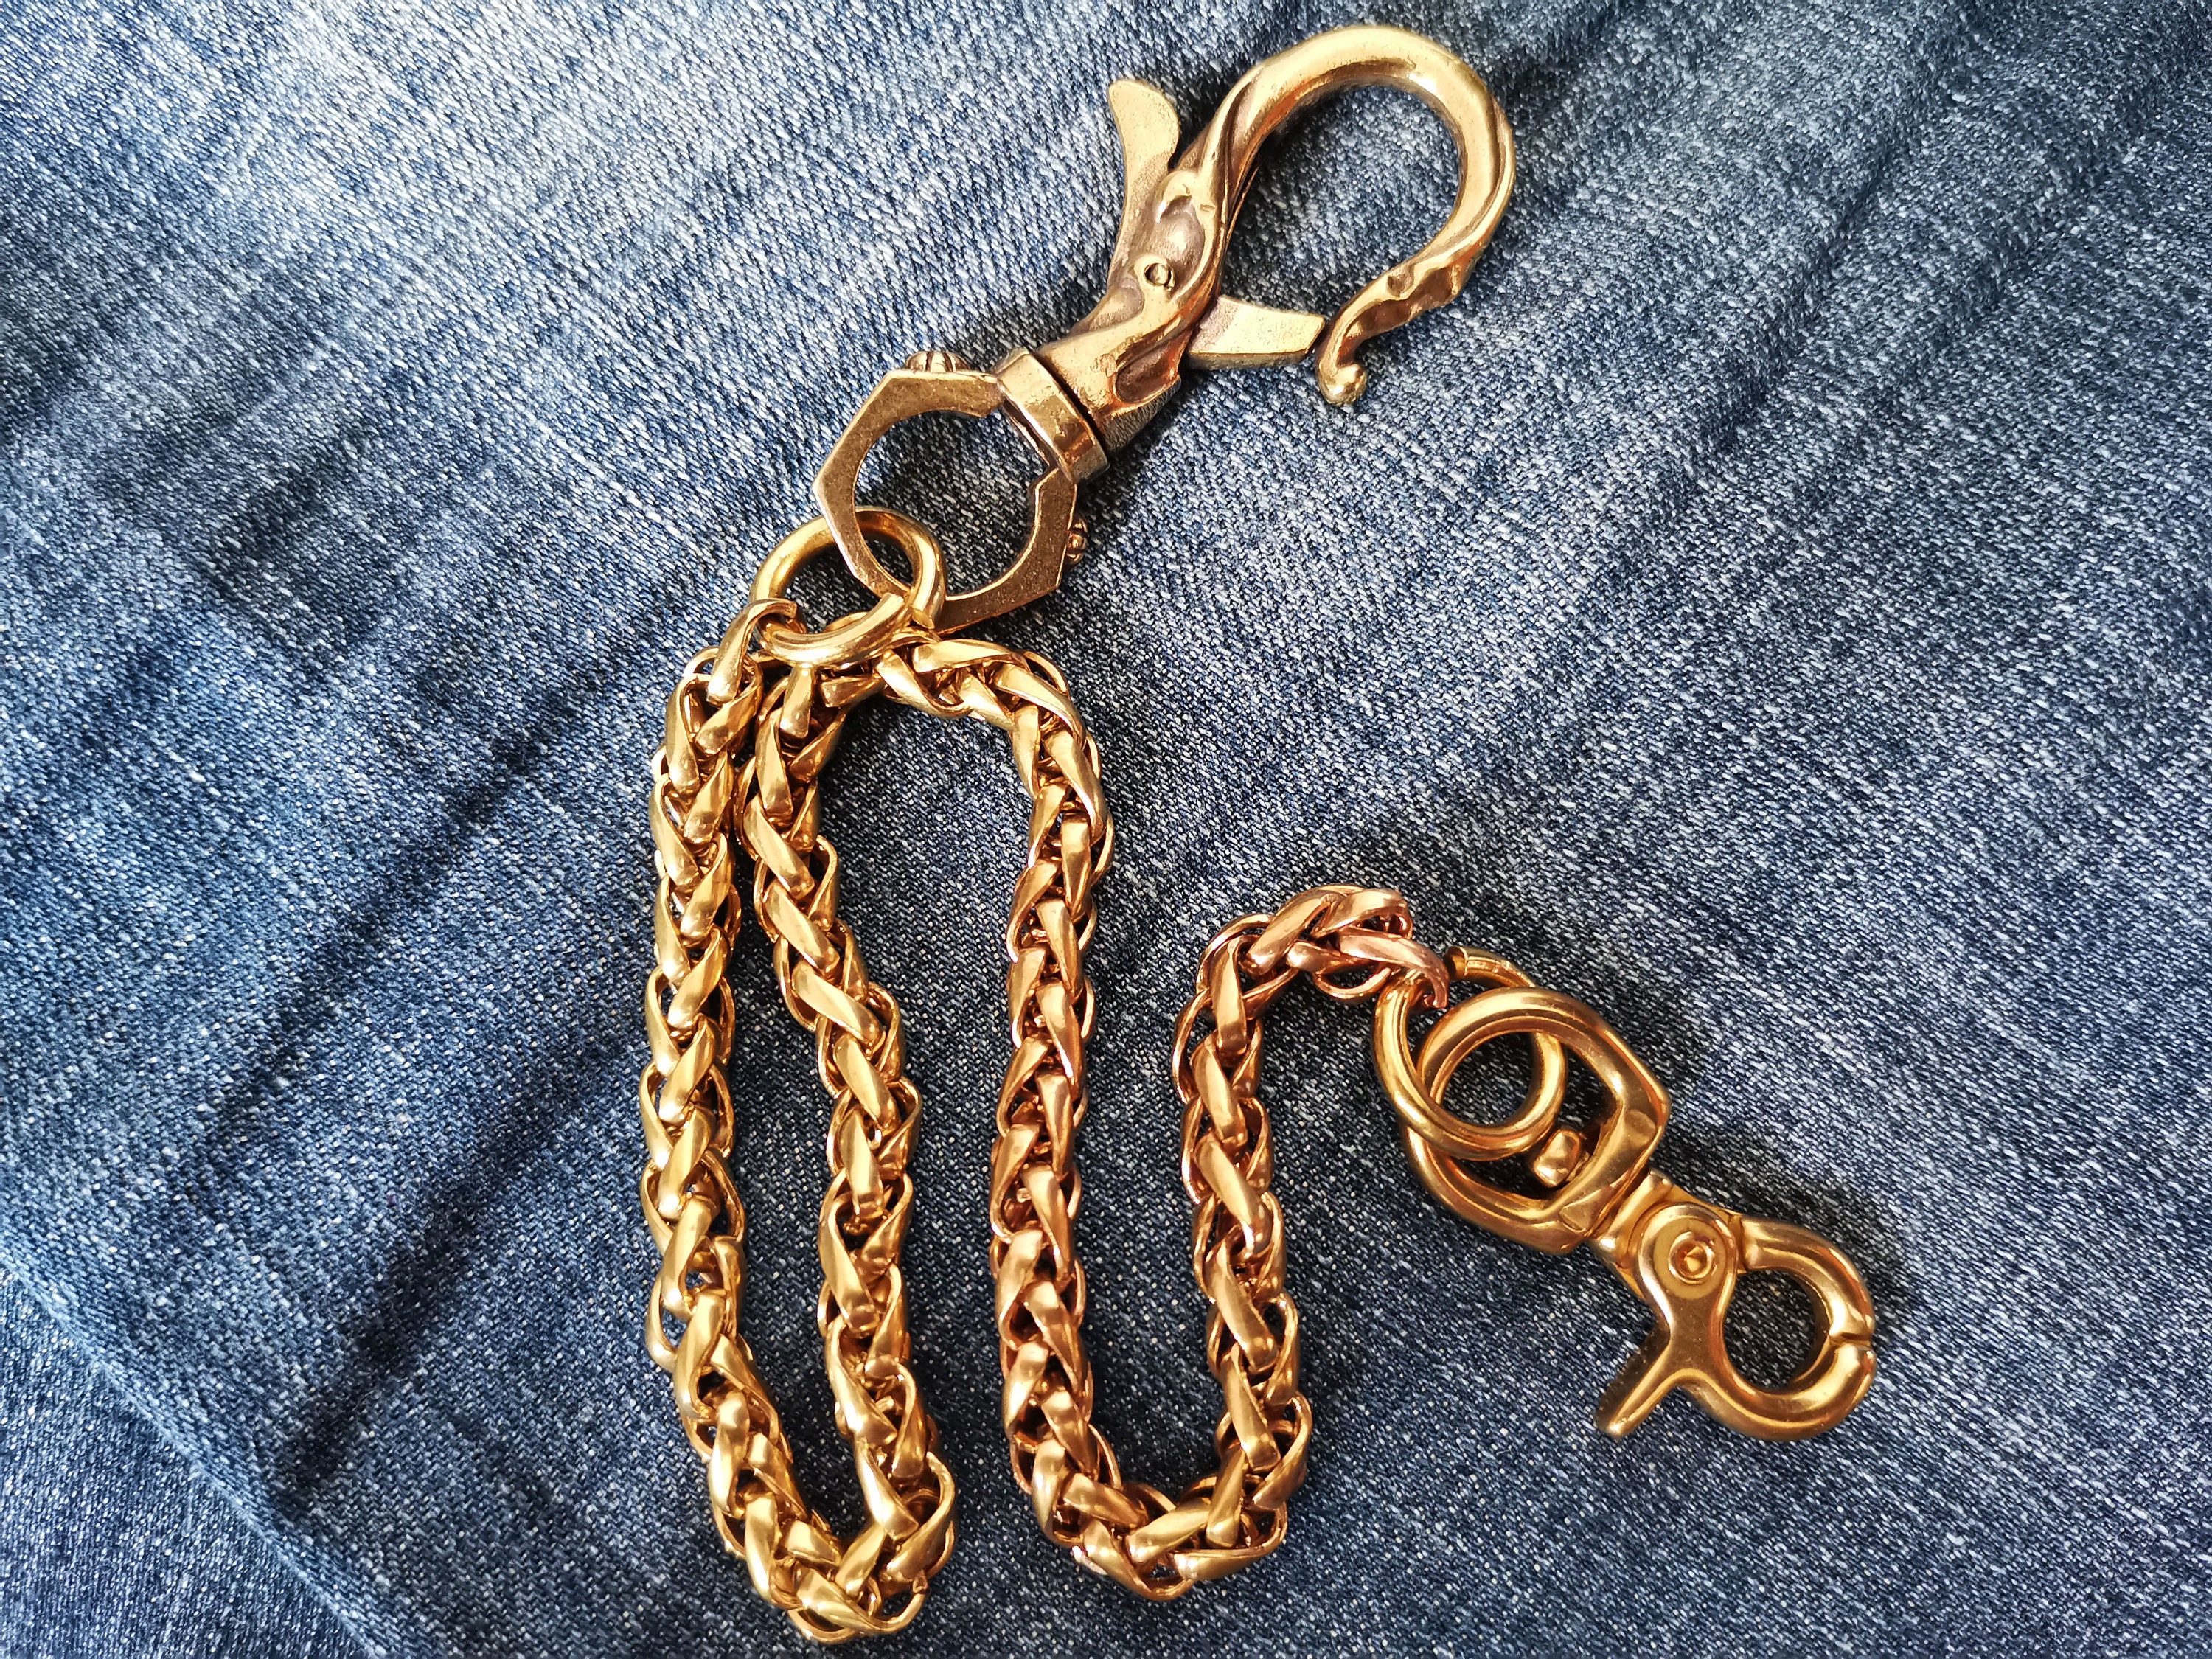 JesminBox Handmade Vintage Solid Brass Wallet Chain with Fish Hook,Single Link Wallet Chain,Belt Hook and Chain,Pants Chain for Men,Vintage Jean Chain